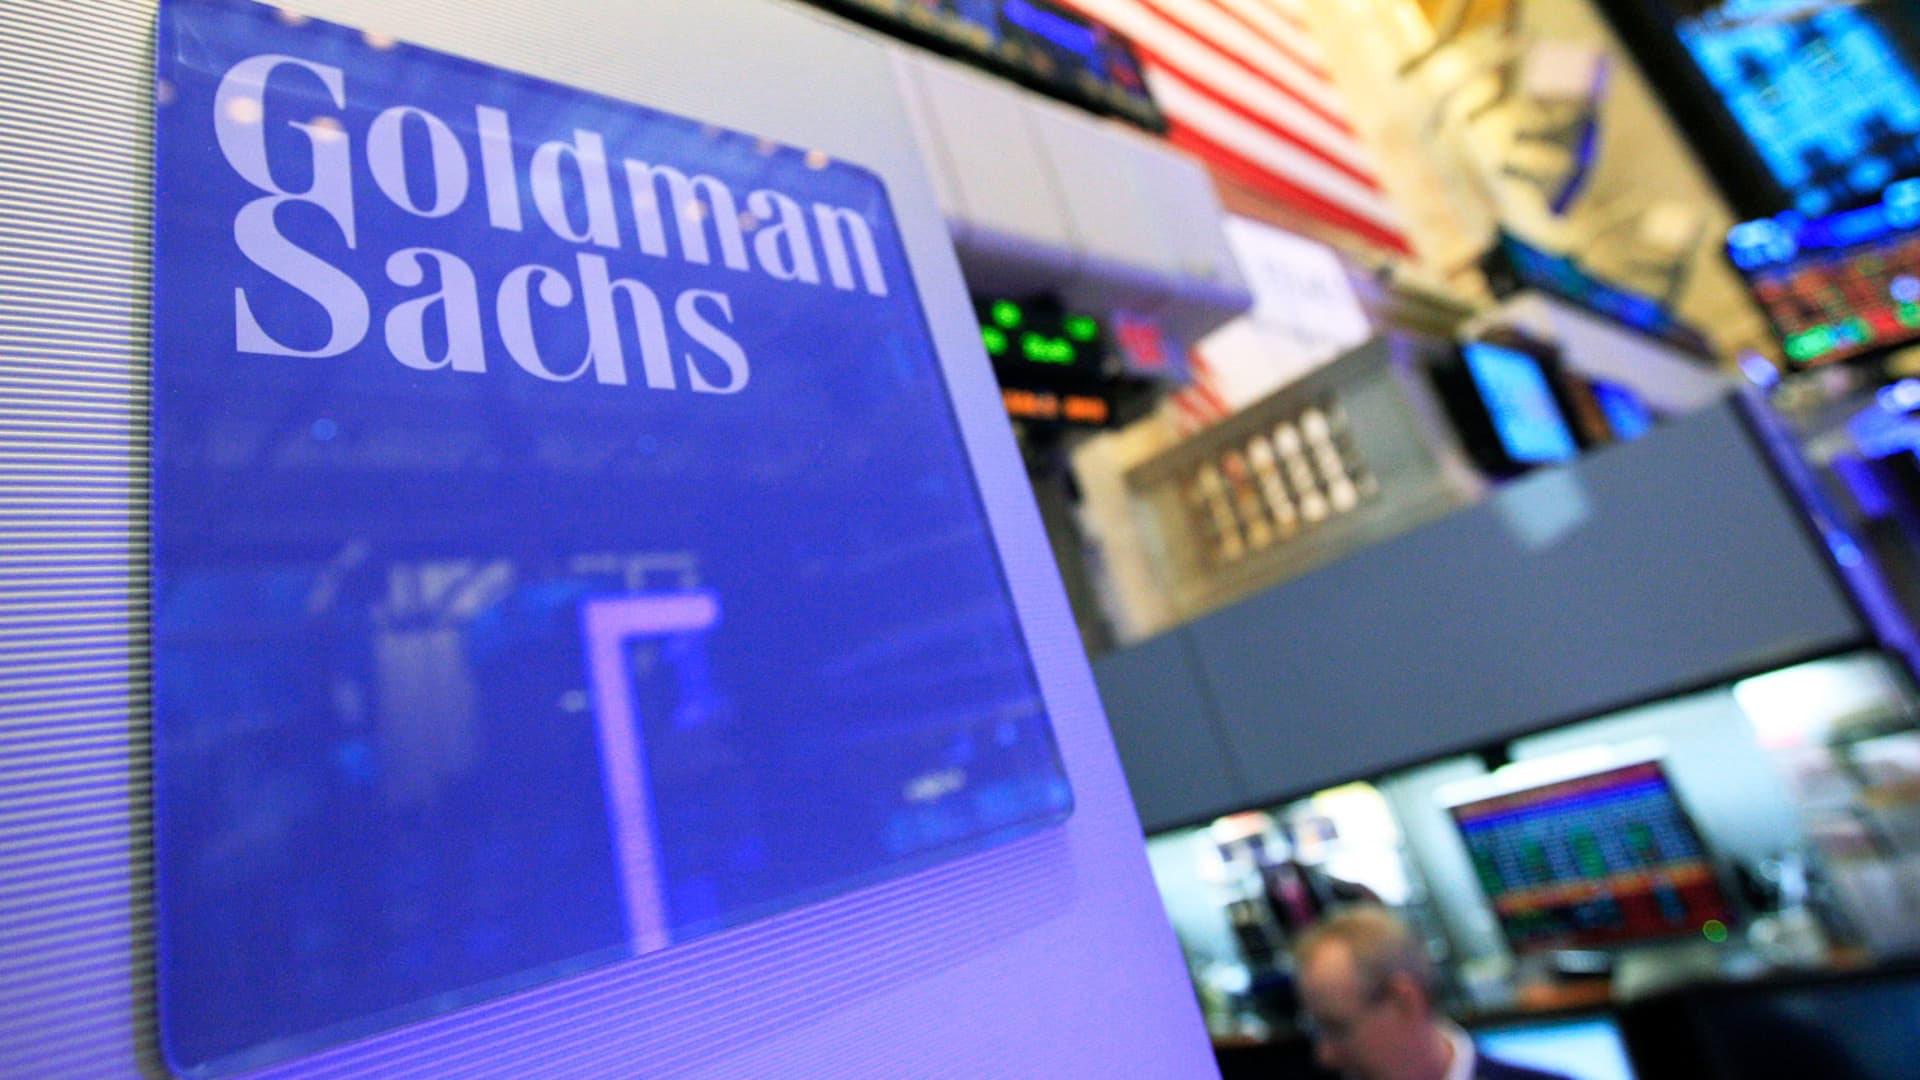 Stocks making the biggest moves midday: Goldman Sachs, Morgan Stanley, Roblox, Alibaba and more